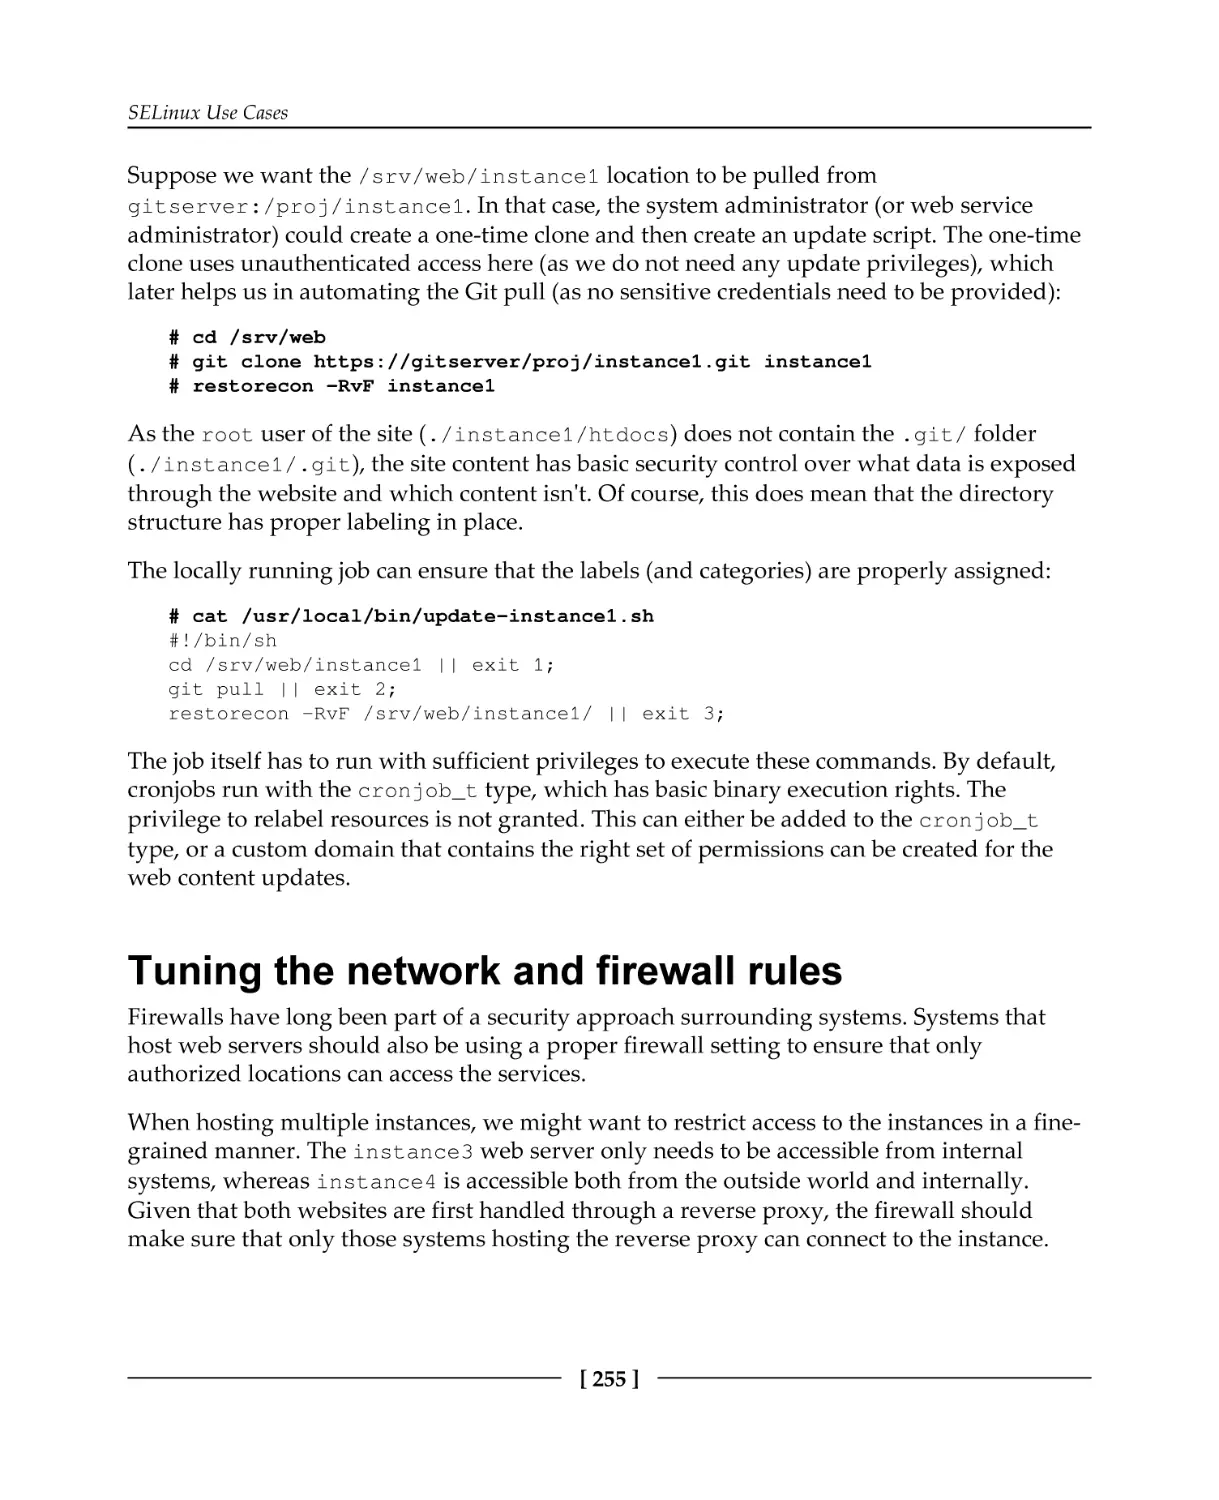 Tuning the network and firewall rules